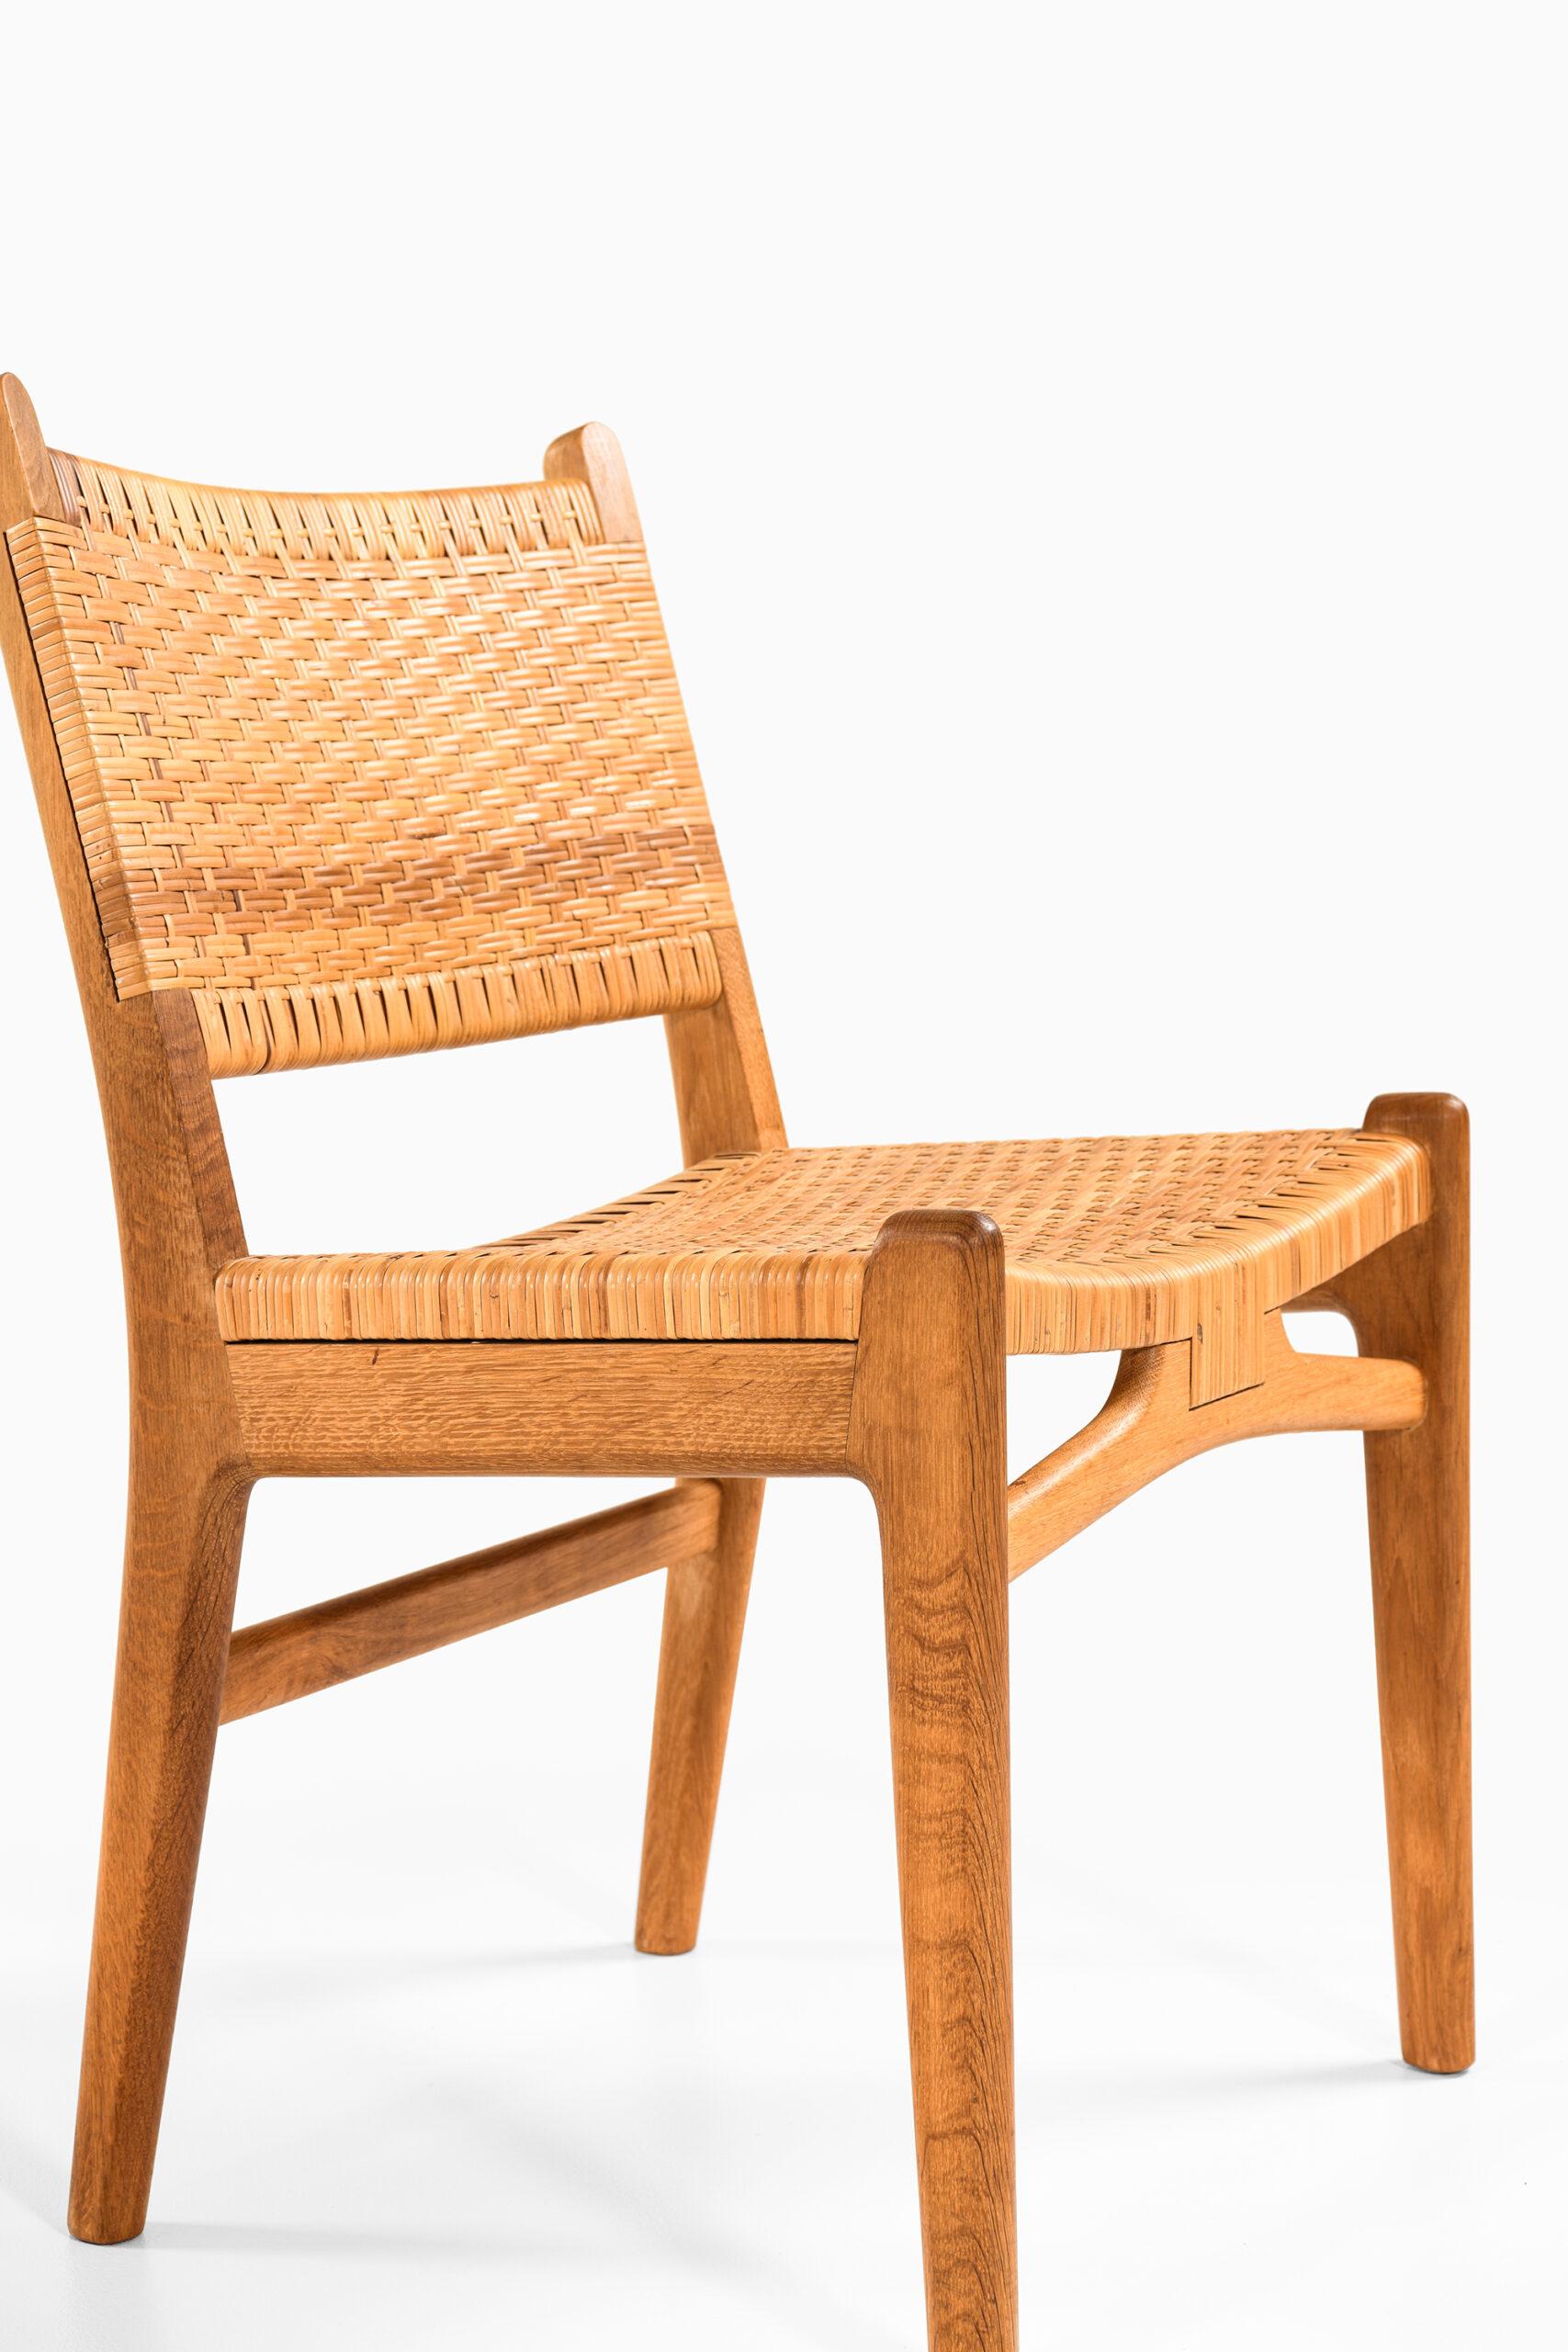 Mid-20th Century Hans Wegner Dining Chairs Model CH-31 Produced by Carl Hansen & Son in Denmark For Sale